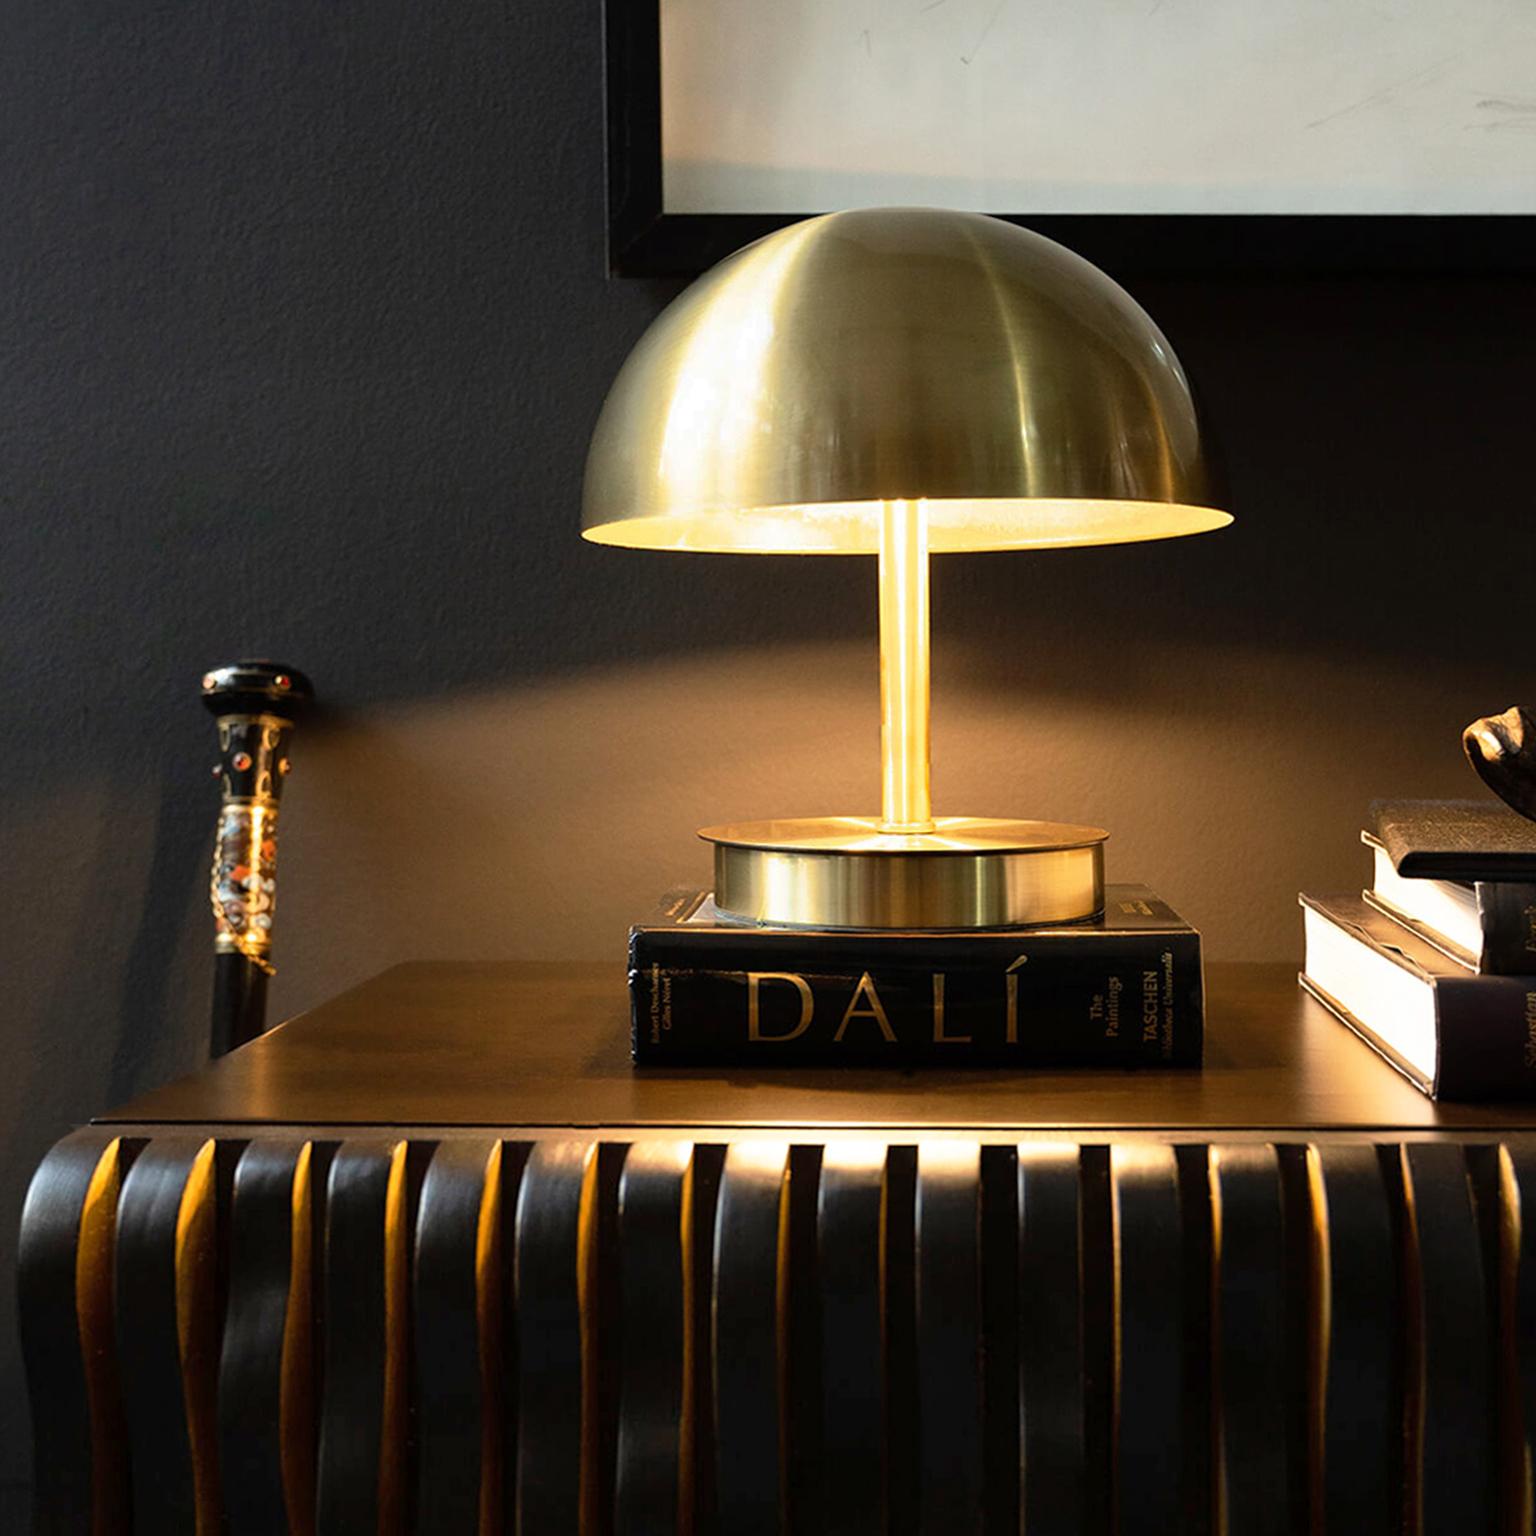 The ORB table lamp offers a flawless form in brass plated metal to illuminate your space with quality and elegance...

The Orb Table Lamp, which is in the shape of a hemisphere, stands out not only as a functional lighting but also for its simple